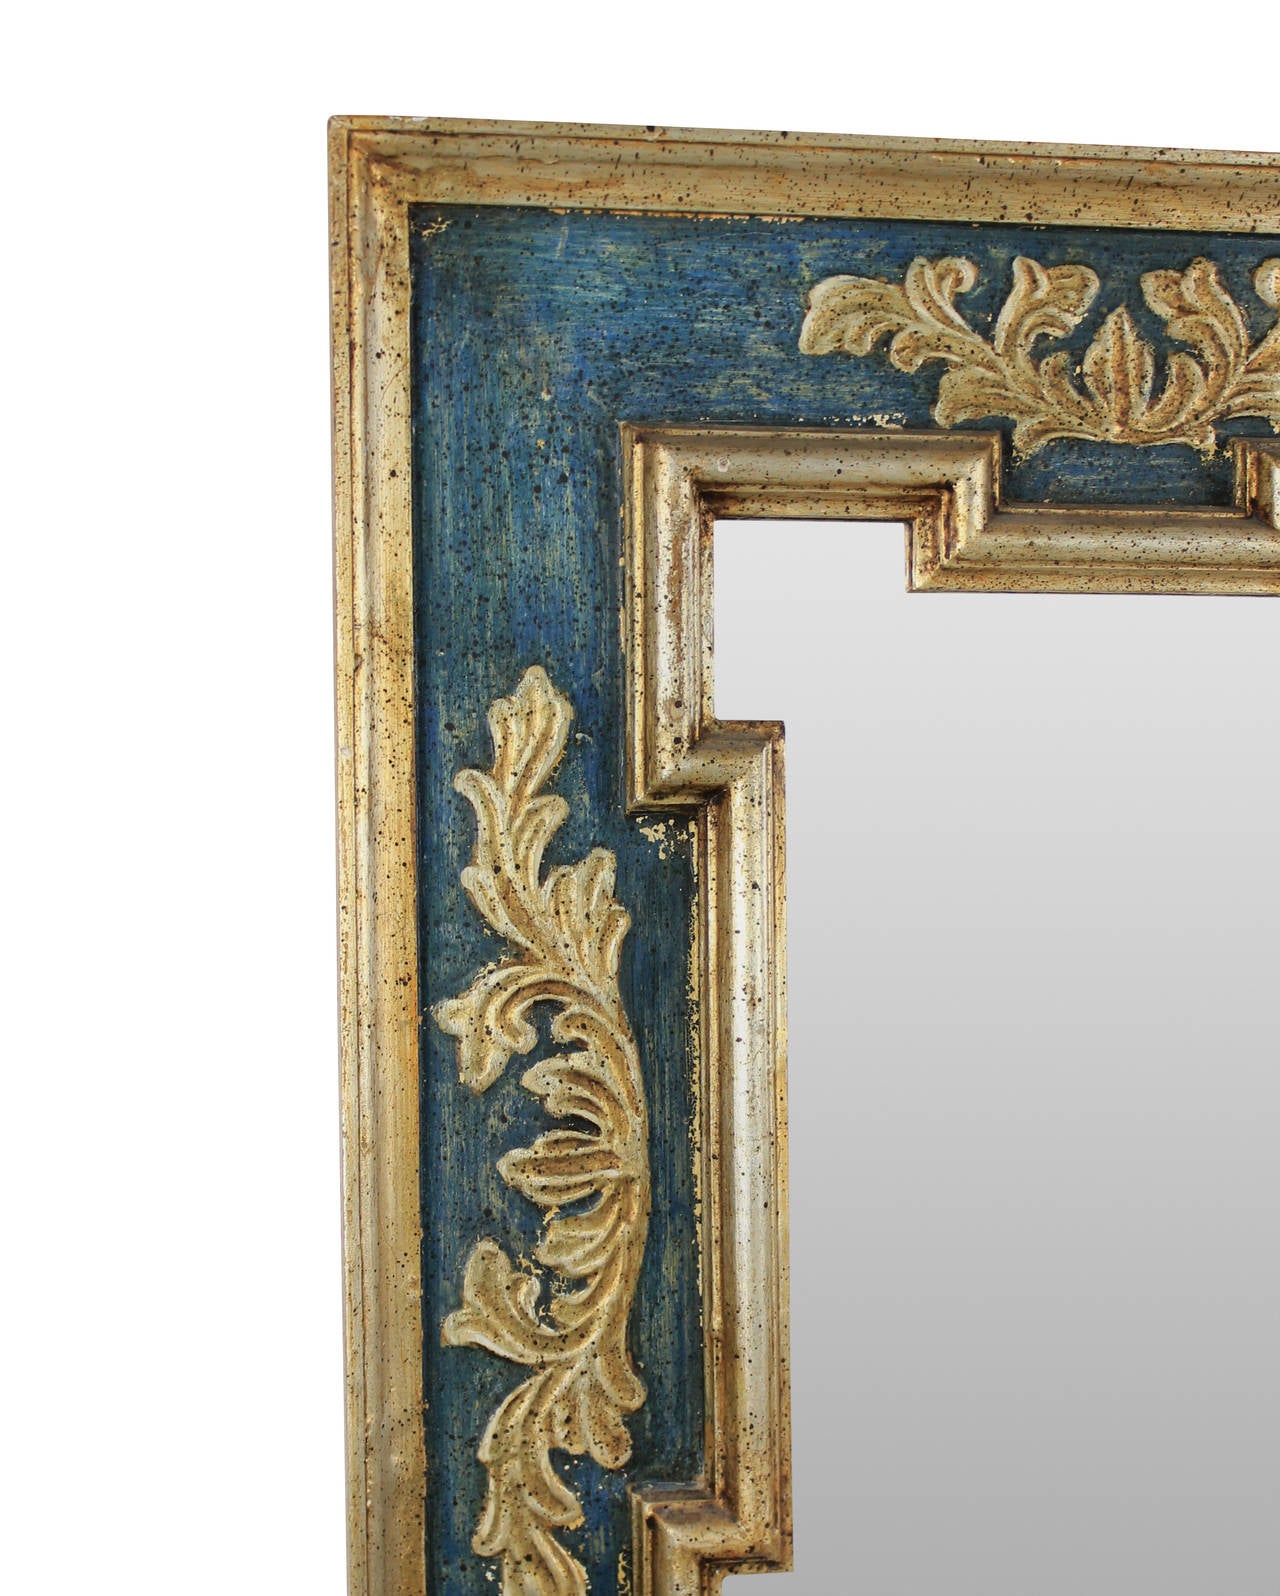 A midcentury Florentine mirror in a green painted finish with gold and silver leaf, in the 18th century style.